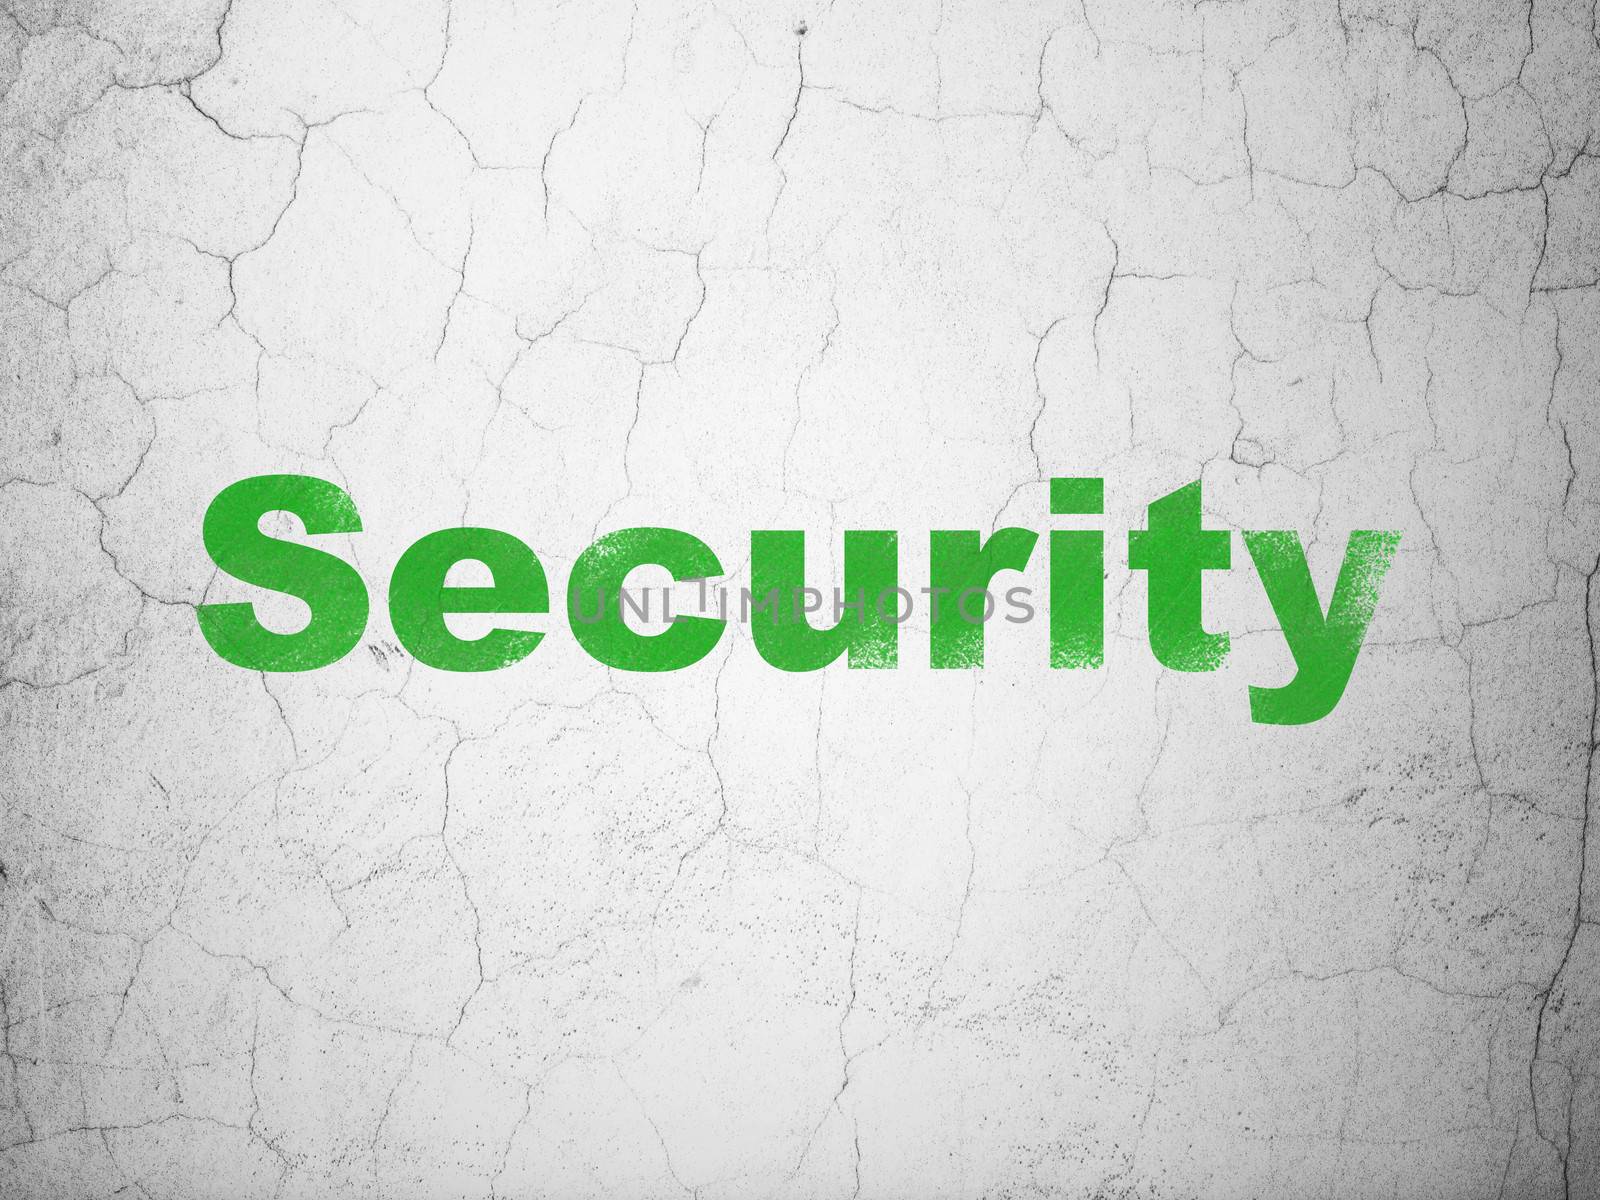 Security concept: Green Security on textured concrete wall background, 3d render